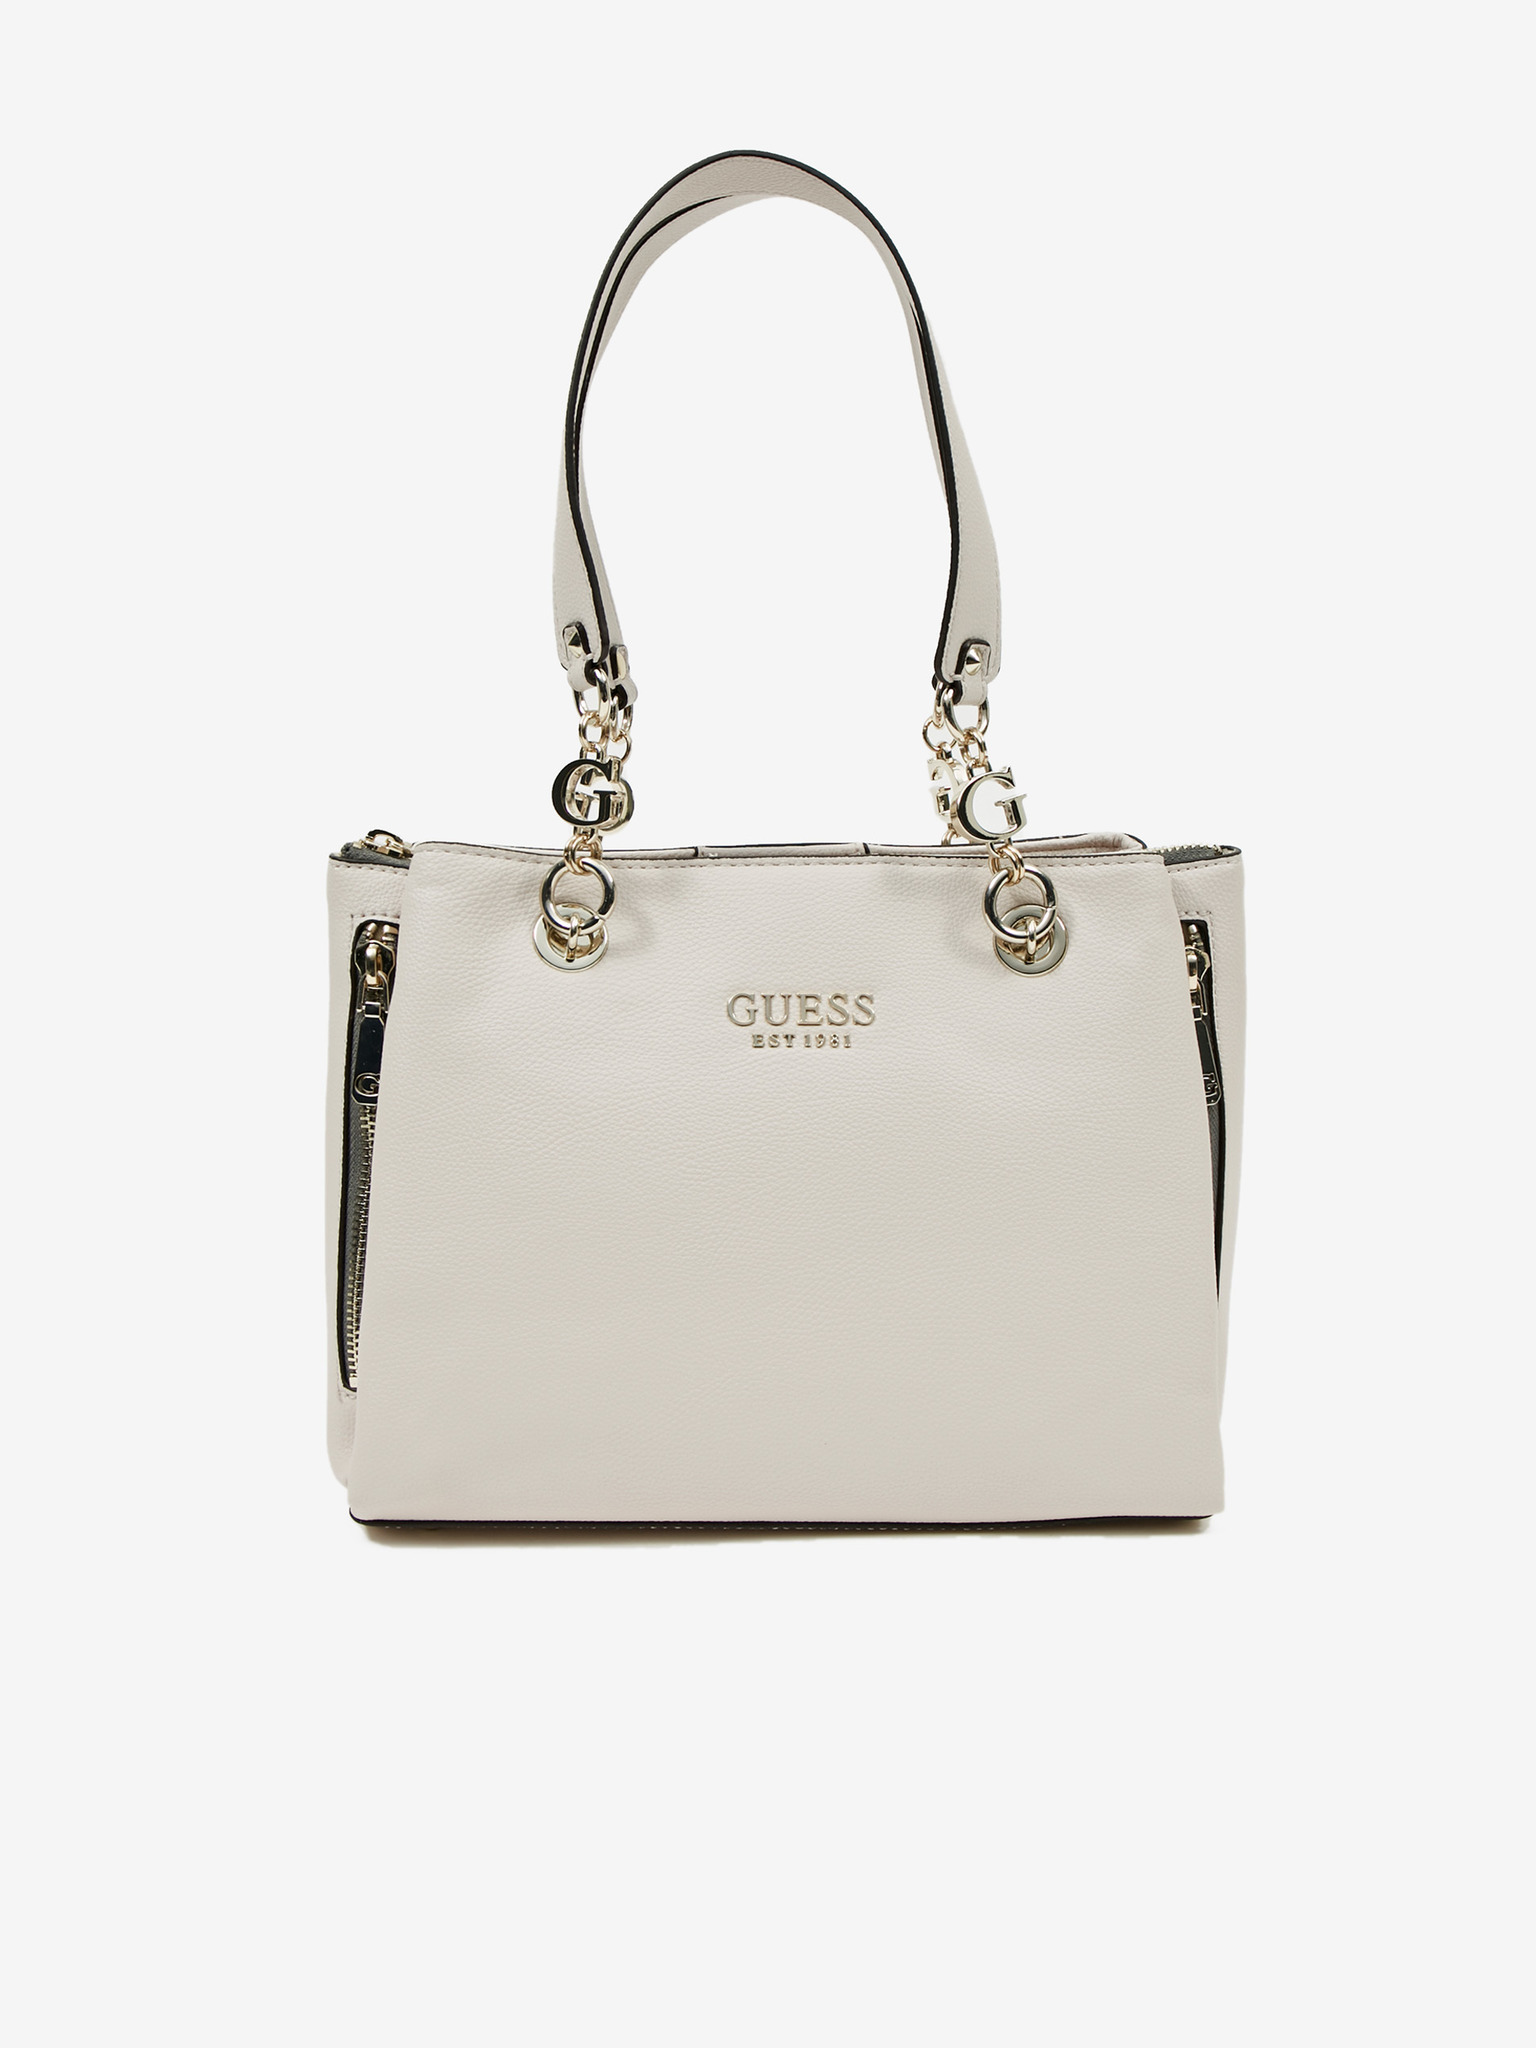 GUESS bag online shop - Free Delivery